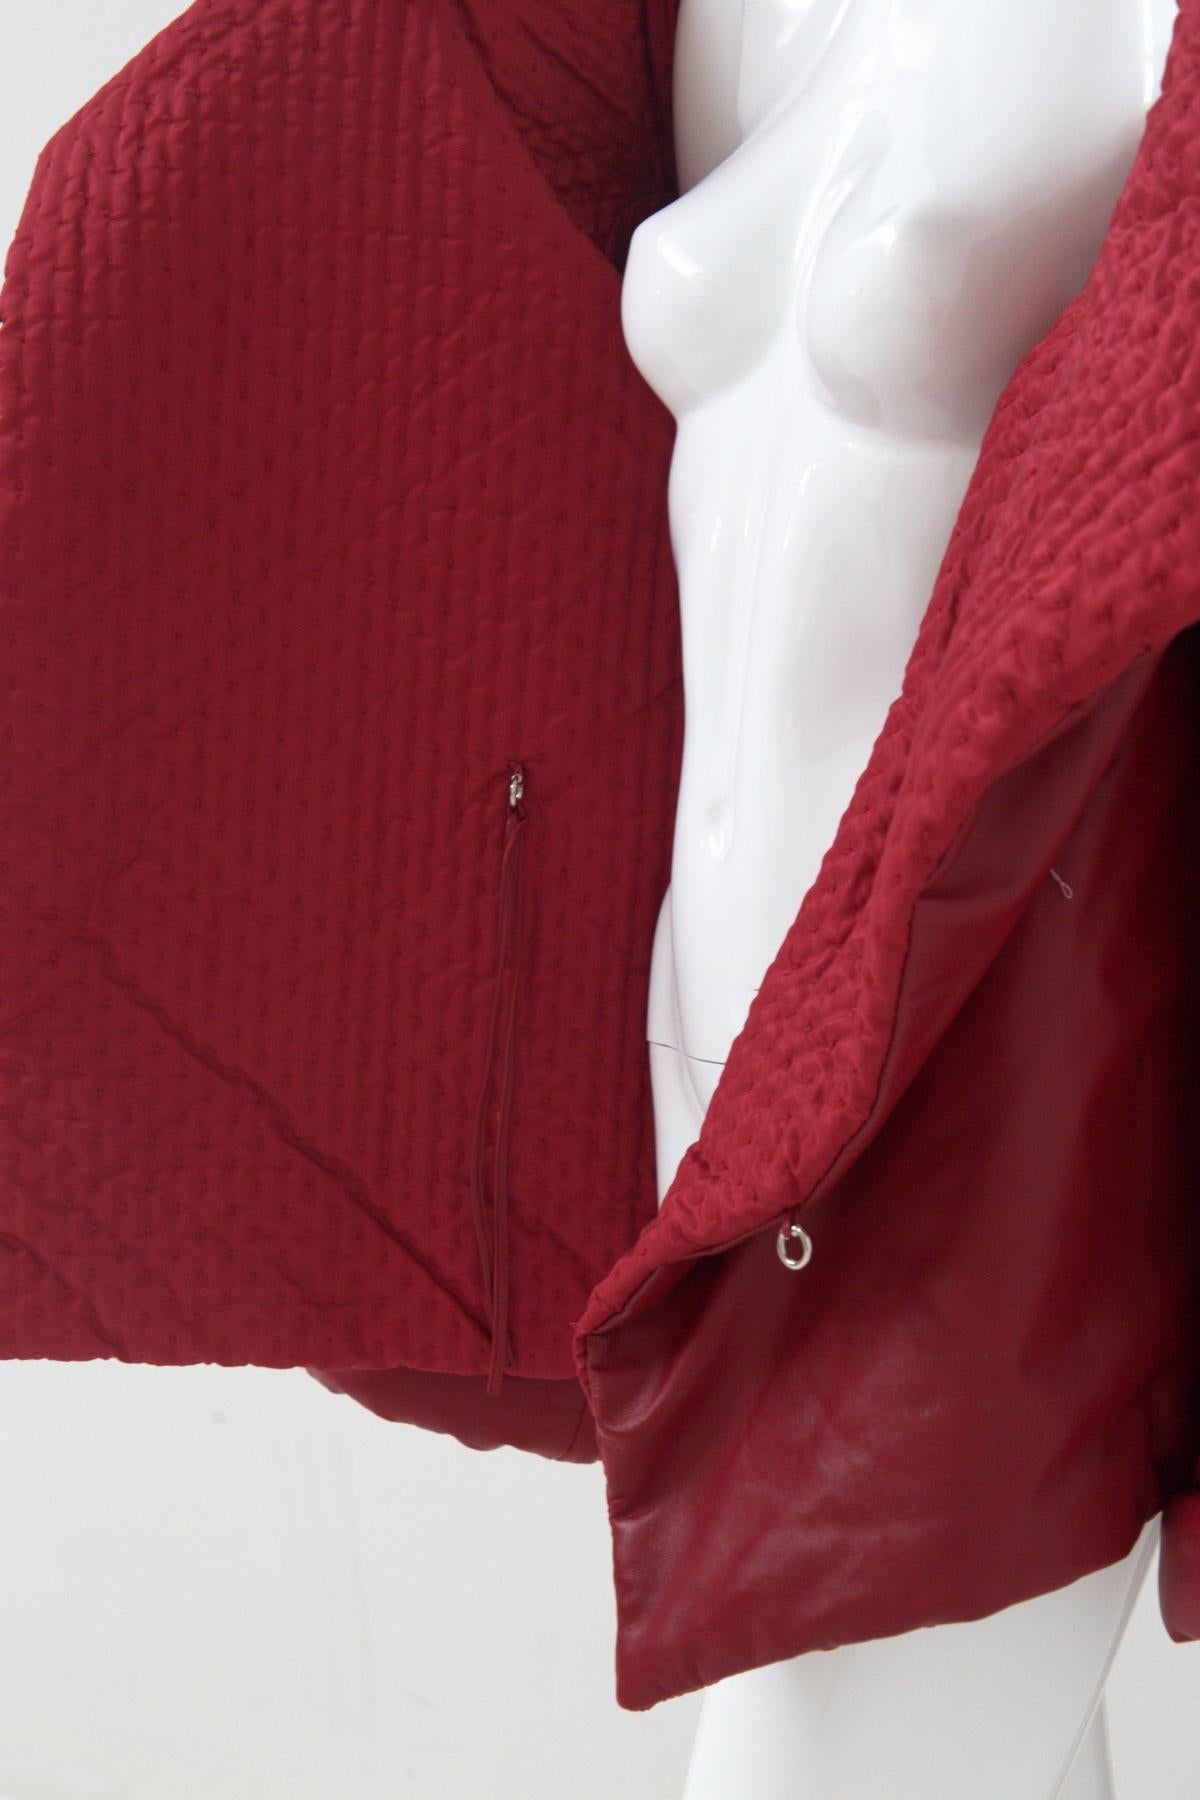 Gianfranco Ferré Rare Oversized Red Leather Jacket For Sale 9